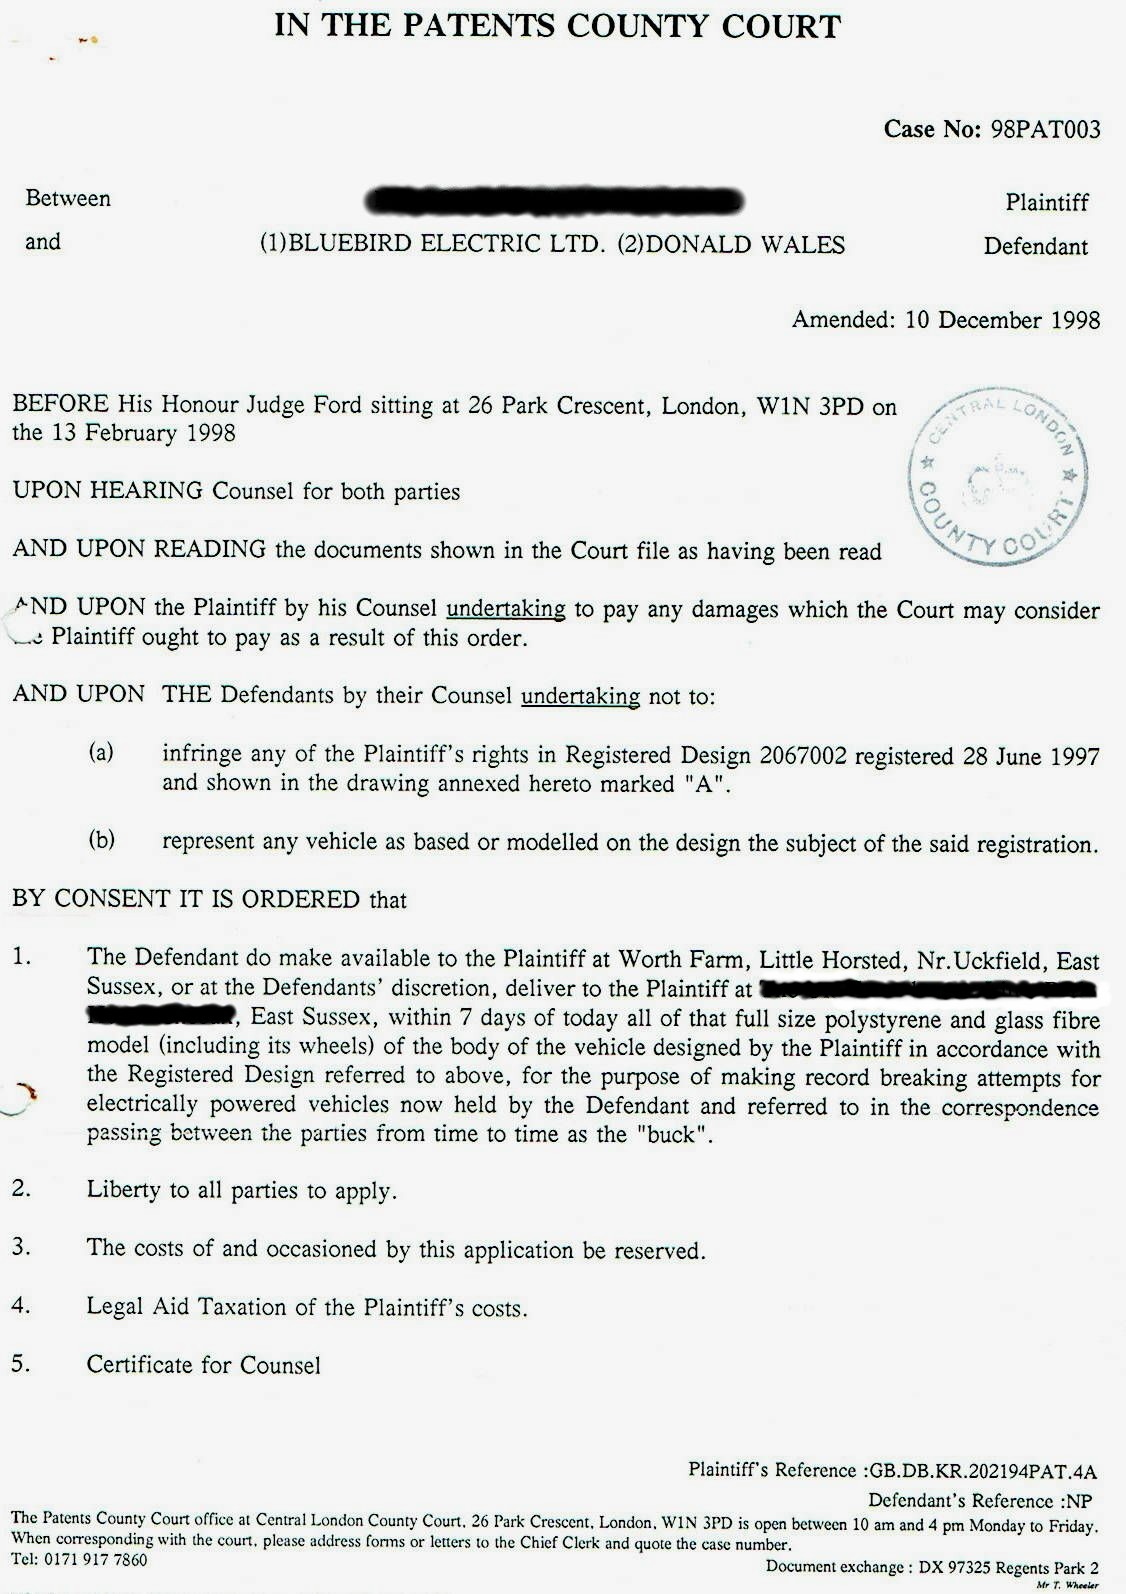 Court Order 10th December 1998, for return of Glassfibre bodywork, chassis and wheels, and not to infringe the right of the Plaintiff in the Registered Design for Bluebird-Electric. Note, that by this time the vehicle had been displayed at the Bluebird Store in London, and at Pendine Sands for Bluebird Holiday Homes. Generating some 155,000 pounds income. Whereas, the money claim attaching was around 62,000 pounds. The Plaintiff subsequently offered to take half the claim @ 31,000. But Don Wales refused to countenance any payment. Preferring to transfer the assets of the Bluebird Electric Limited, to another company, to take them out of reach of the Claimant. It is alleged that such a move may constitute Fraud, under the Theft Act 1968, when viewed against the applicable Company law. There is no statute of limitations in cases of fraud. However, Sussex police refused to look into the allegation of fraud. Instead, they raided the Plaintiff's offices, on the complaint of Don Wales, that such documents were not genuine. On discovery that the documents were genuine. They did not prosecute Don Wales for wasting police time. This is just one element of a claim against Sussex police, alleging institutional discrimination and victimization. Where Sussex police is alleged to have conspired with Wealden District Council's officers, to avoid investigating multiple allegations of Planning Fraud. Don Wales is known to have at least one friend serving as a District Councillor. It is also alleged, the Wealden illegally passed documents they had on file, to Don Wales. These documents have been redacted to protect the identity of the Plaintiff.